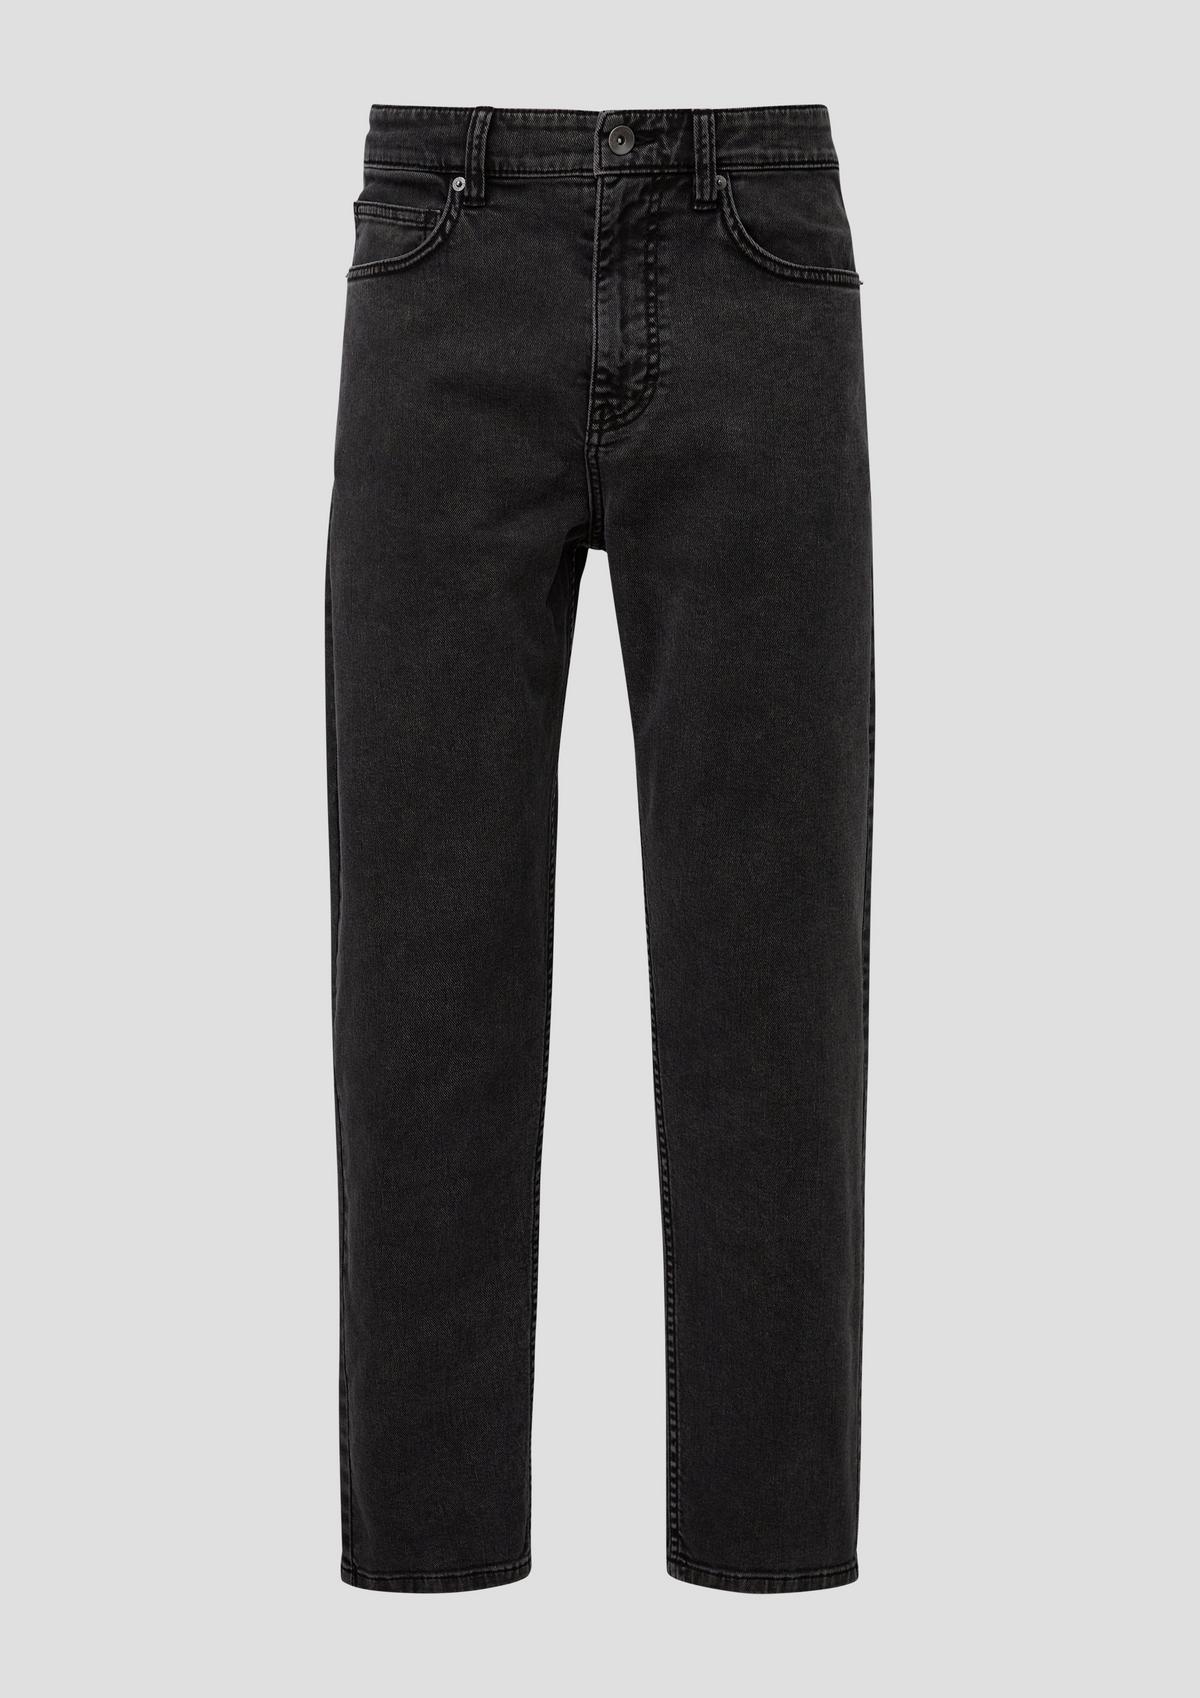 s.Oliver Brad jeans / relaxed fit / high rise / tapered leg